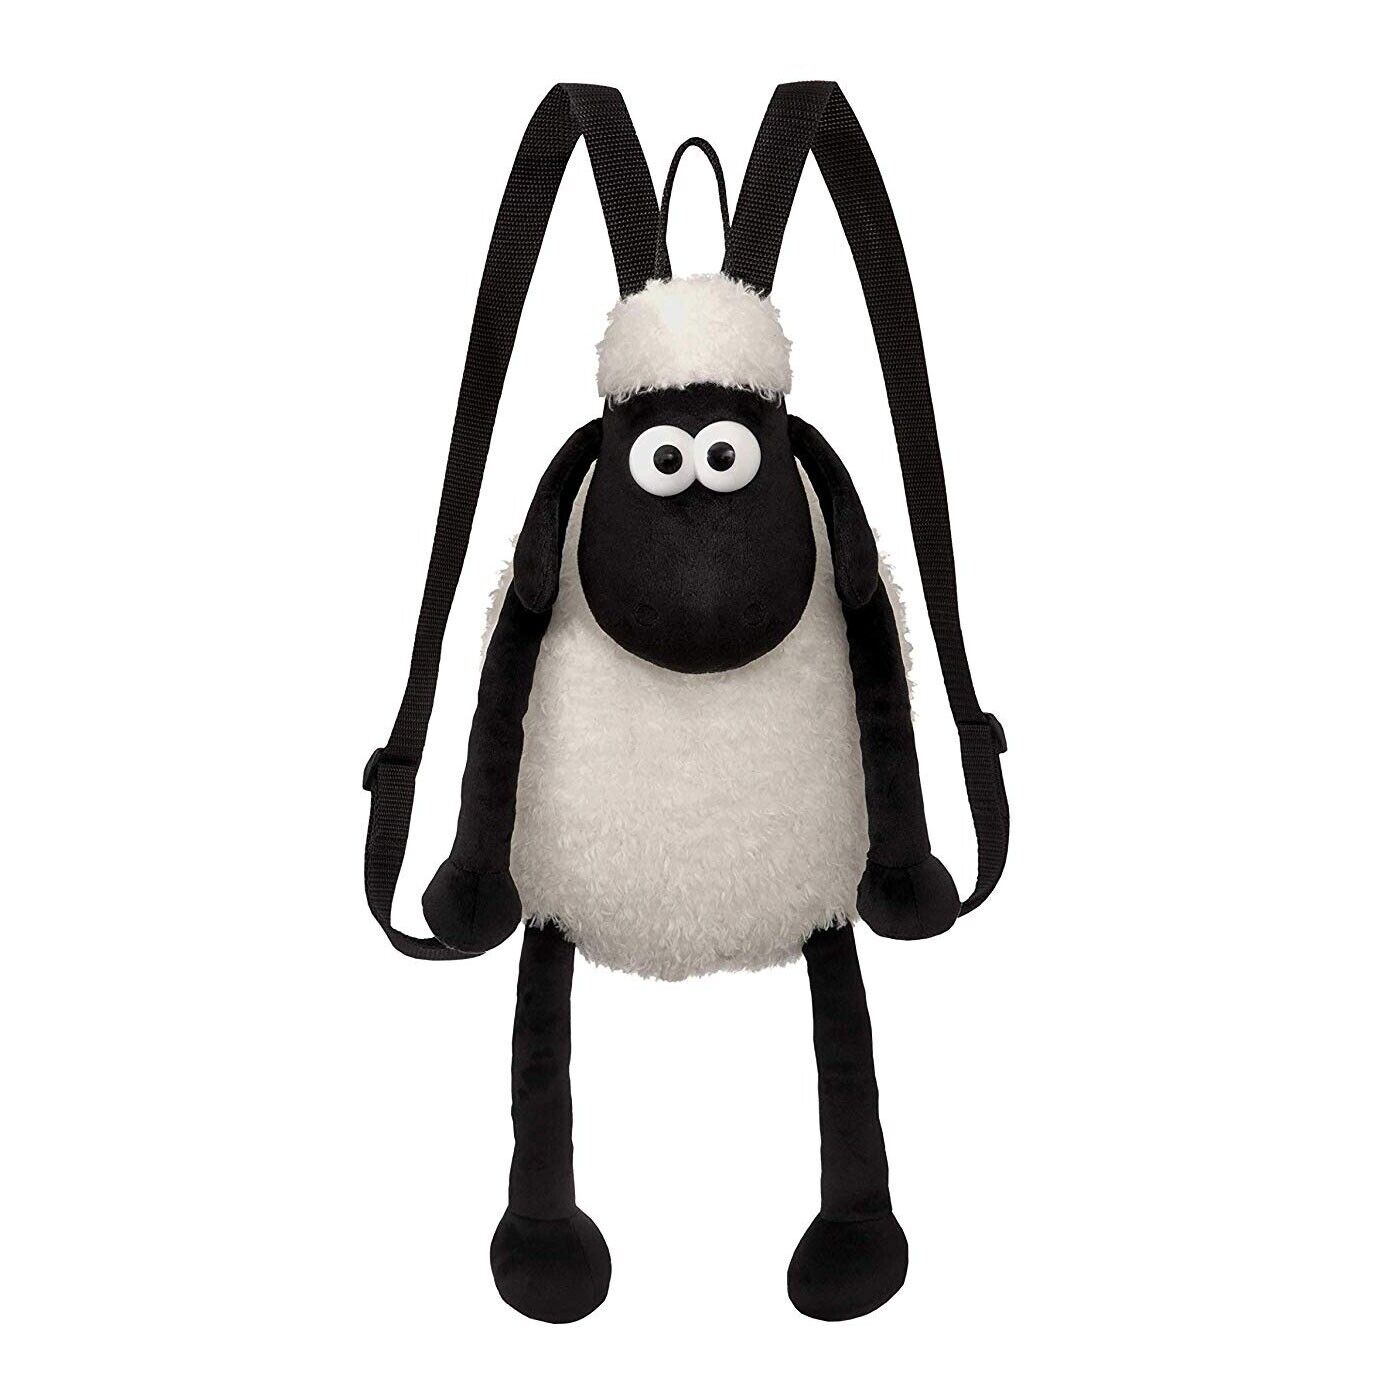 New Shaun the Sheep Plush Backpack - Adorable and Practical!